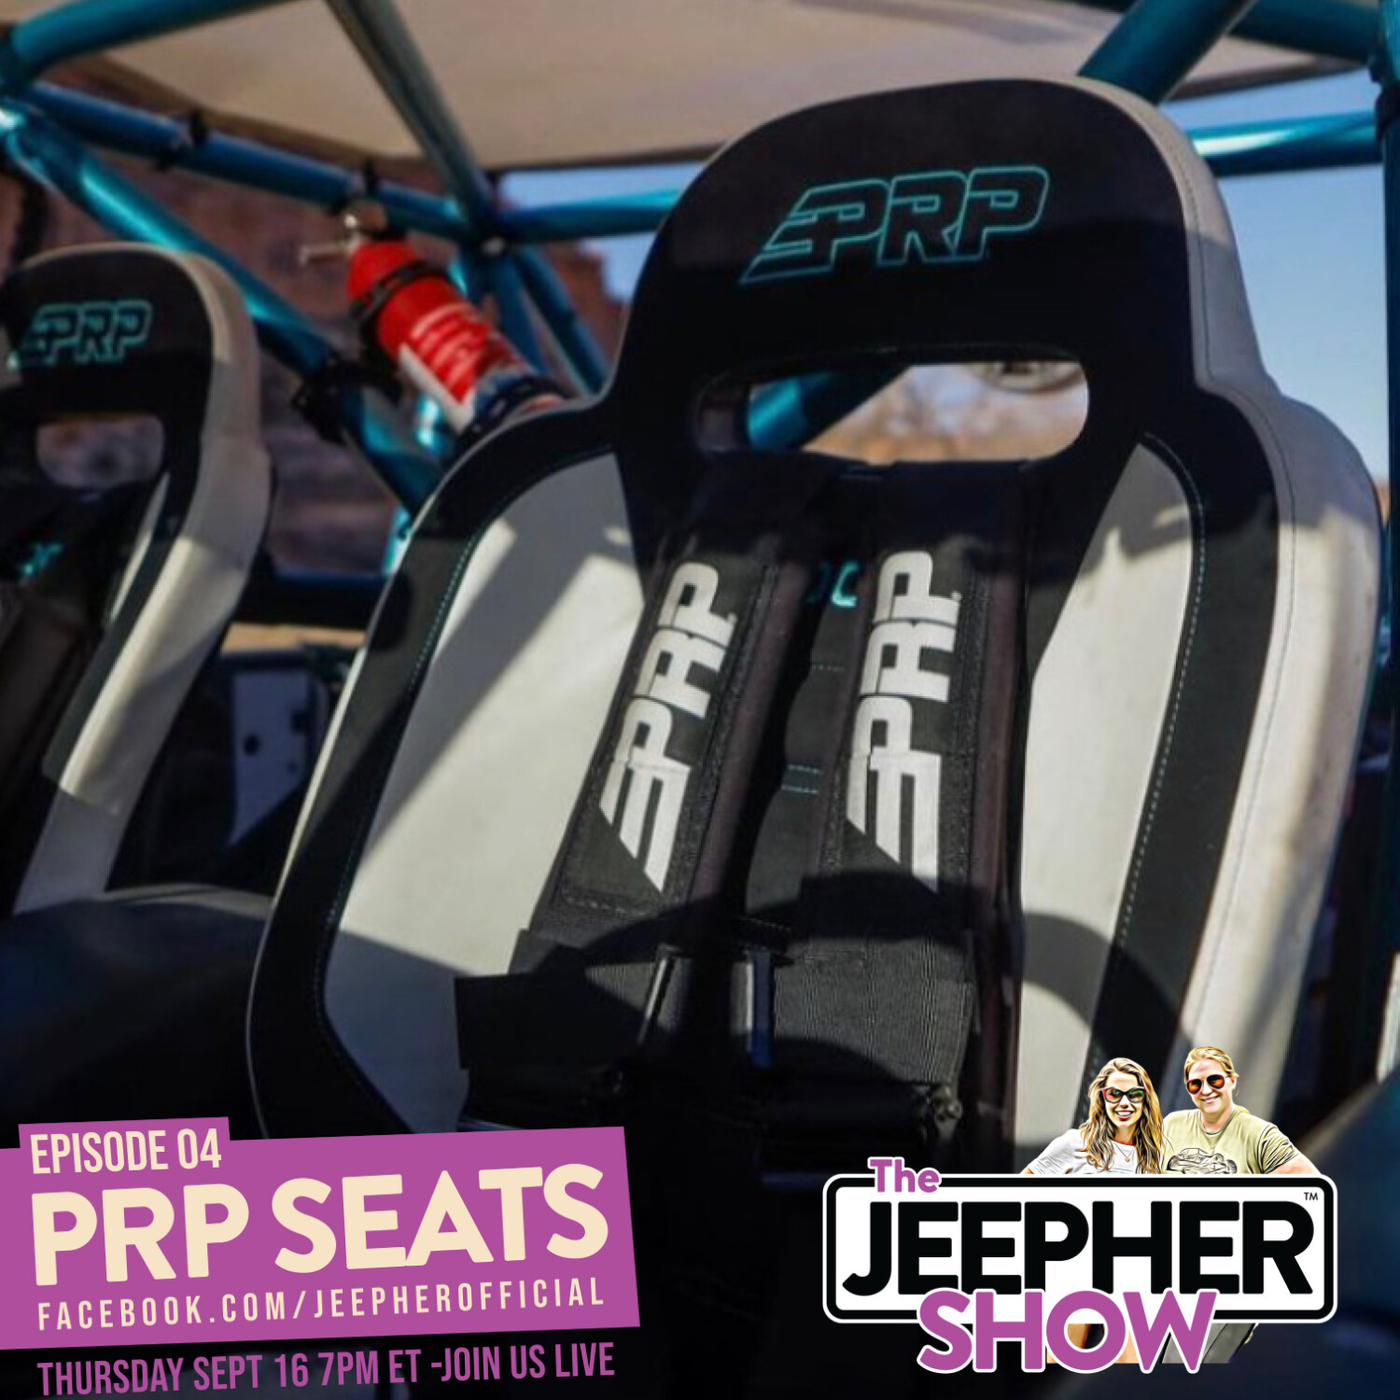 All About Prp Seats The Jeepher Show